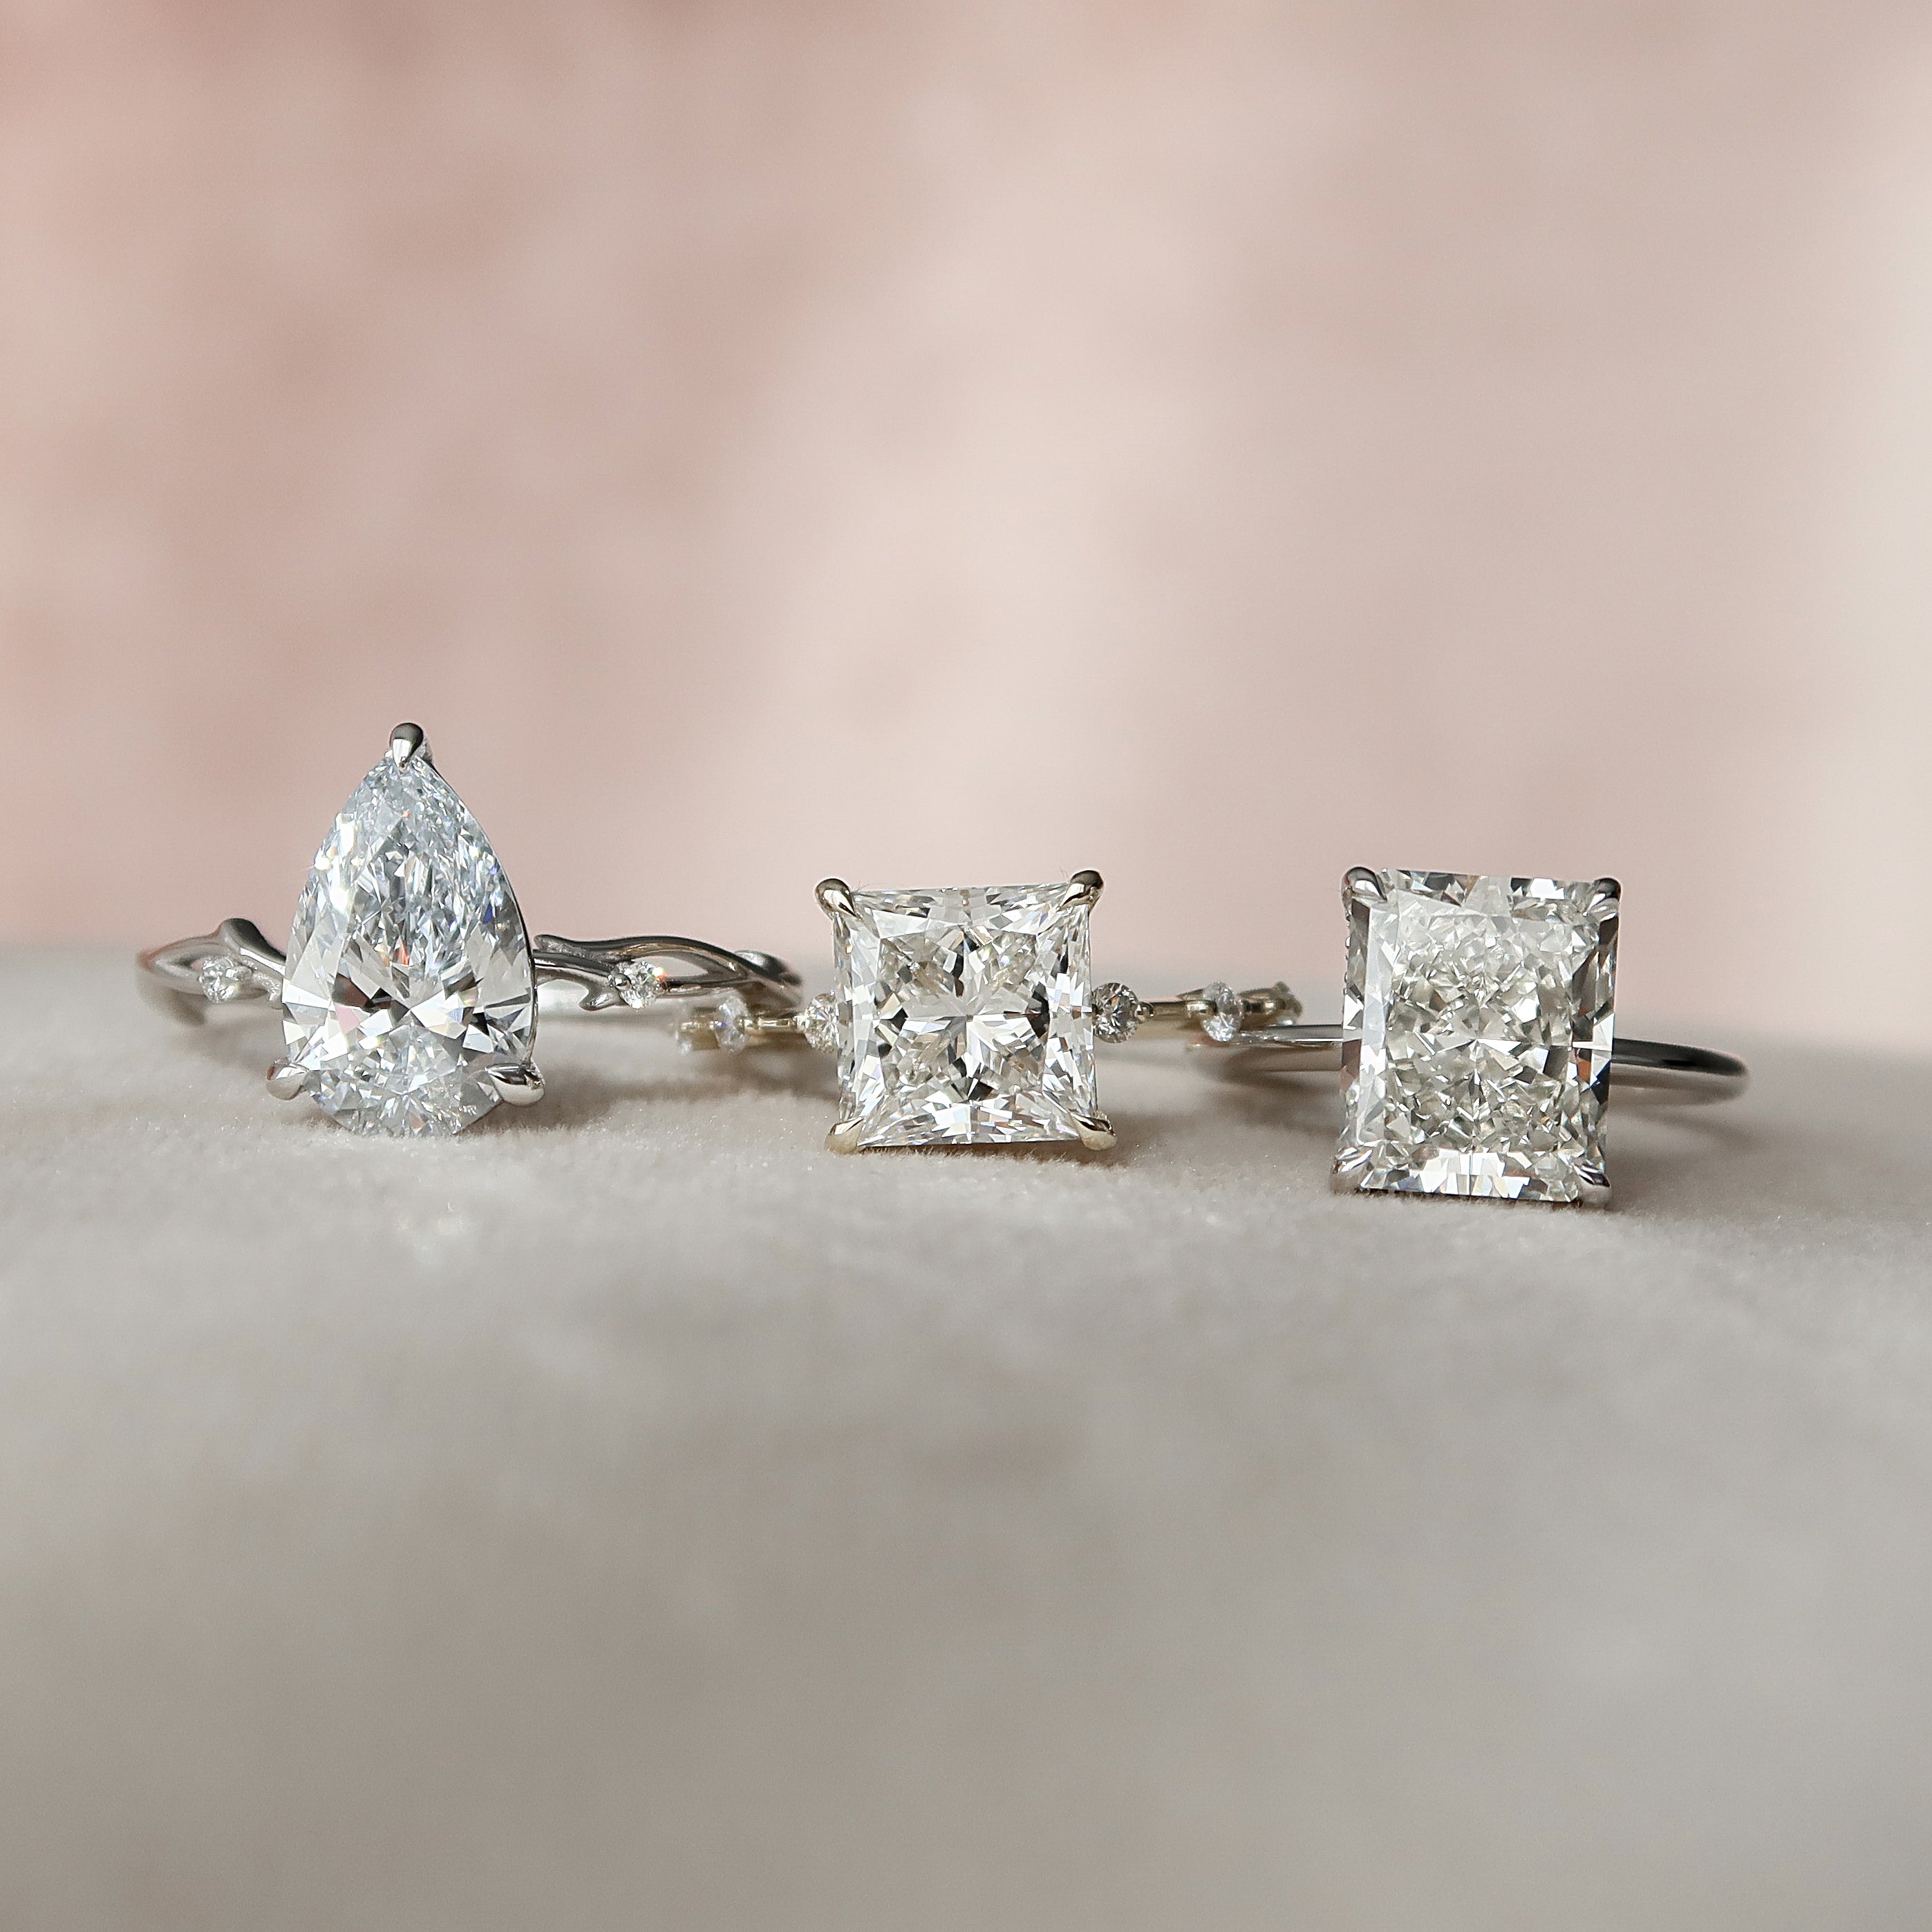 Which Diamond Shape Has The Most Sparkle?